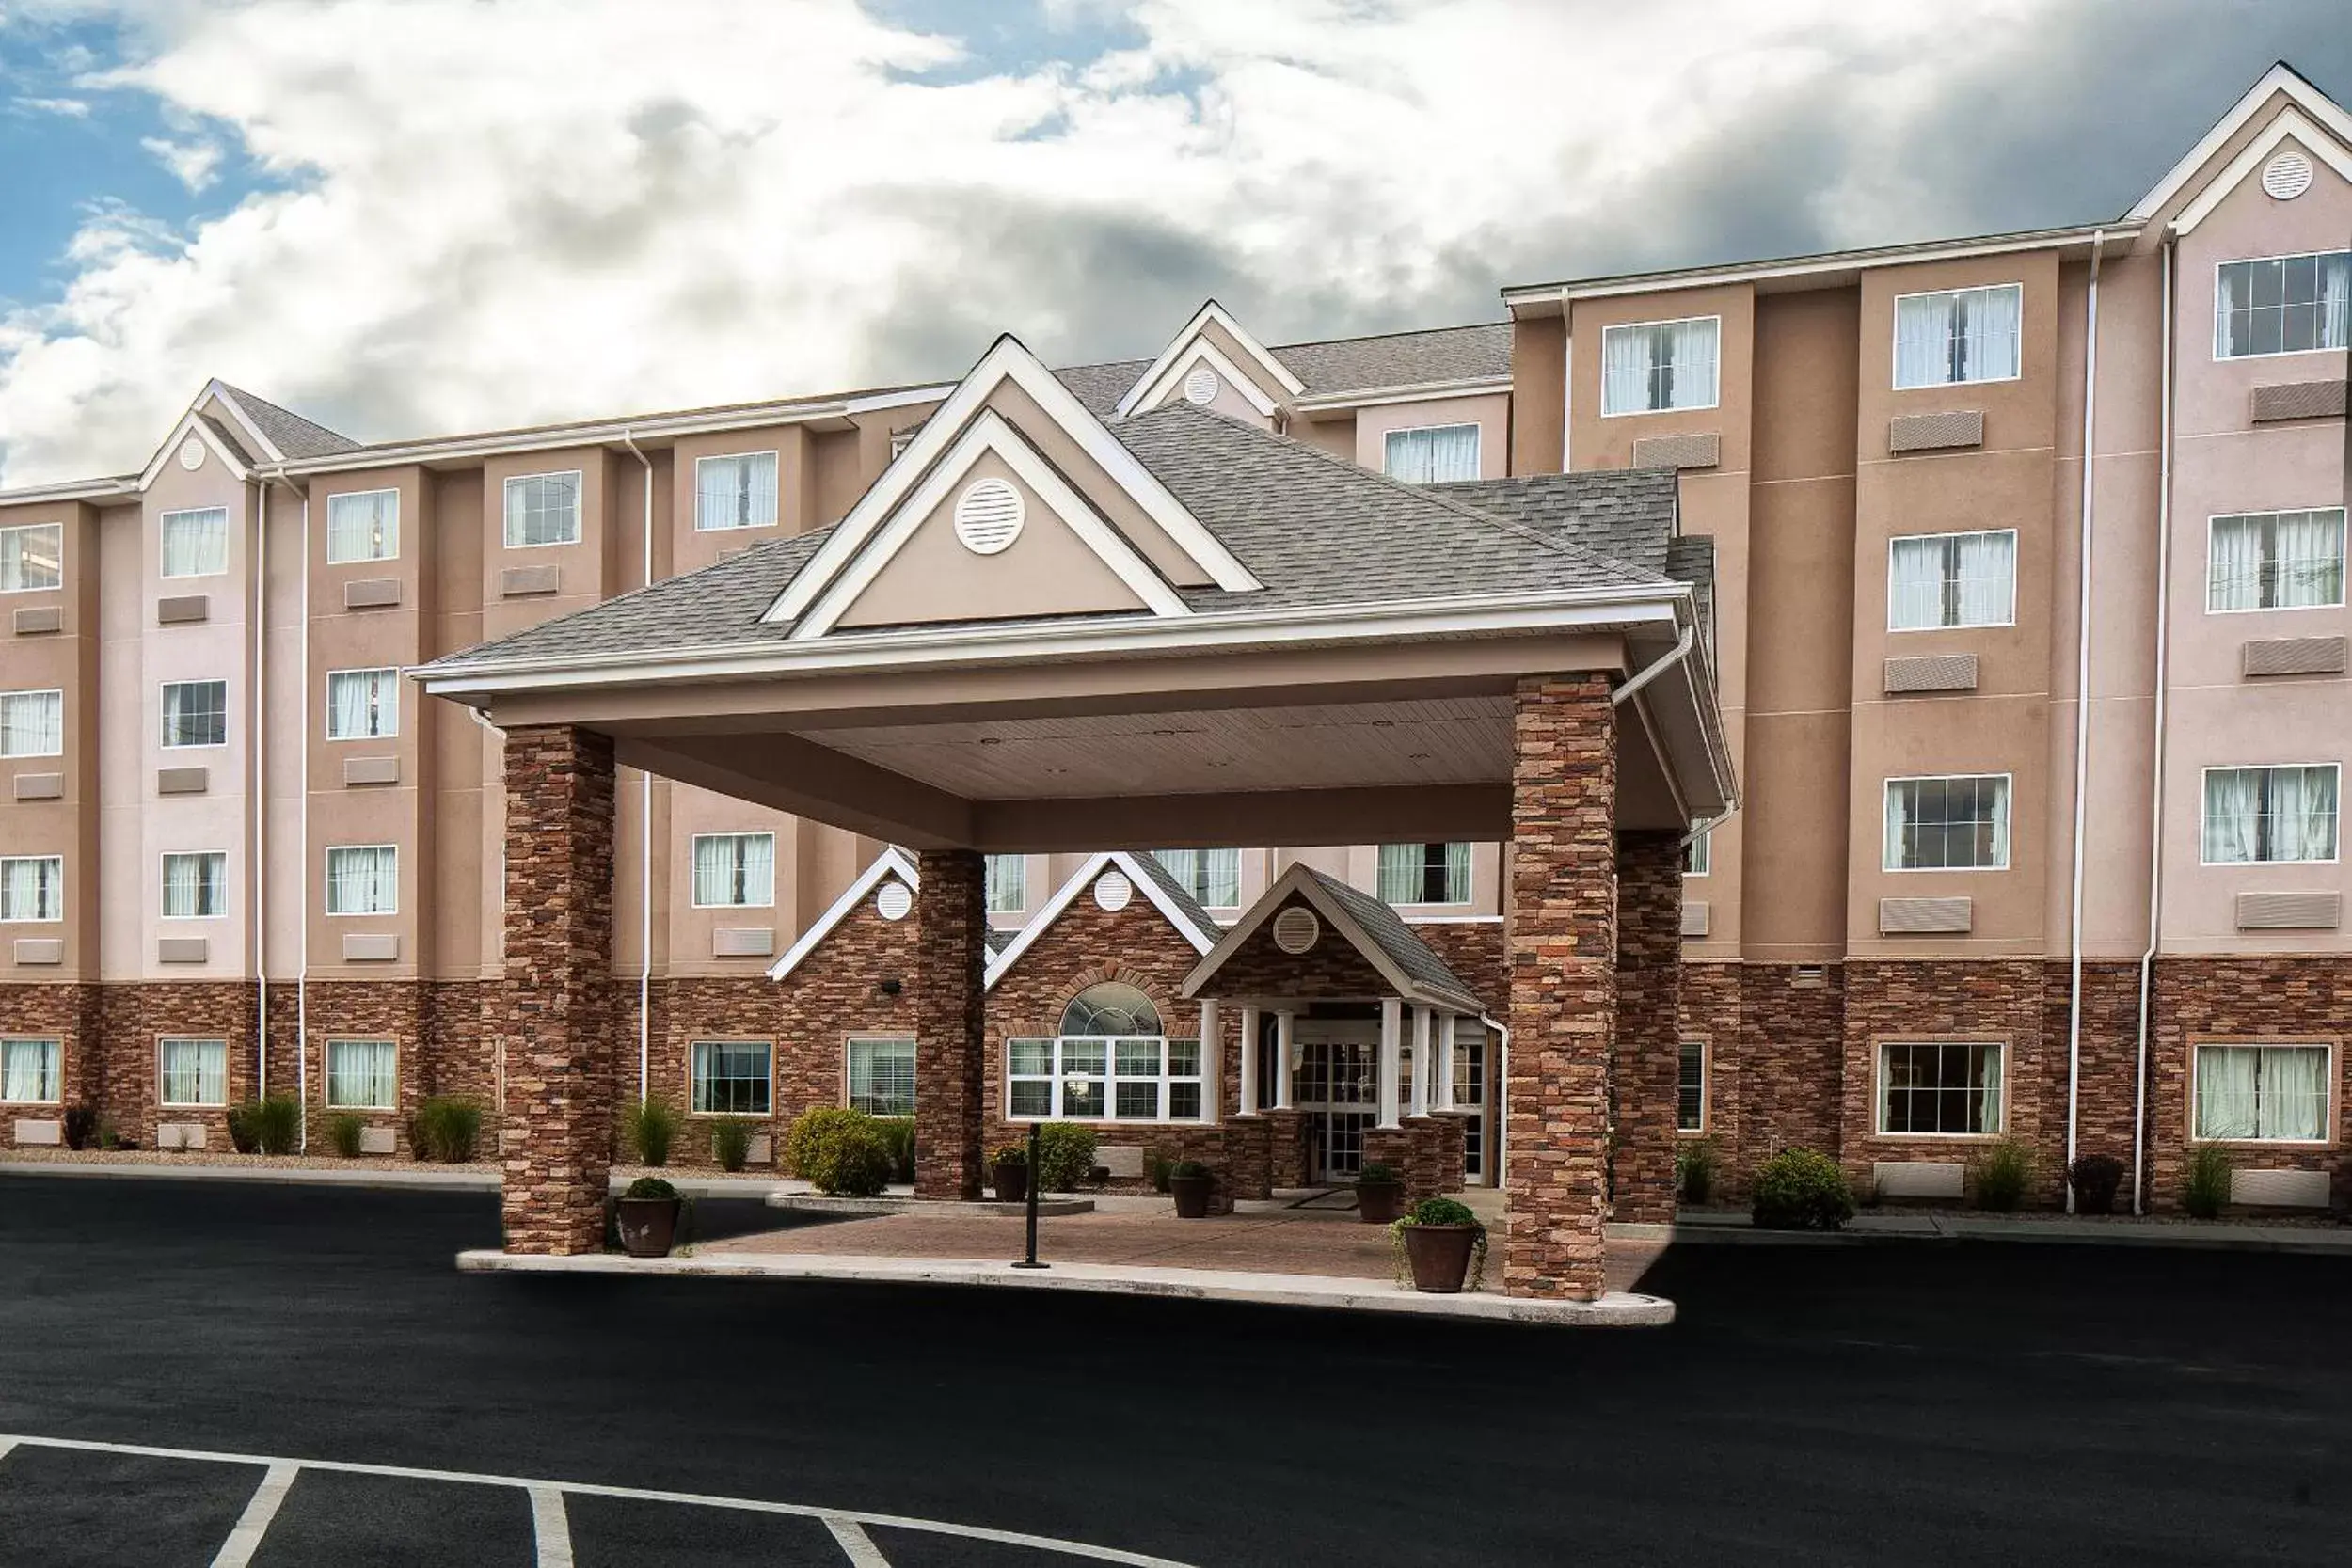 Property Building in Microtel Inn & Suites - St Clairsville